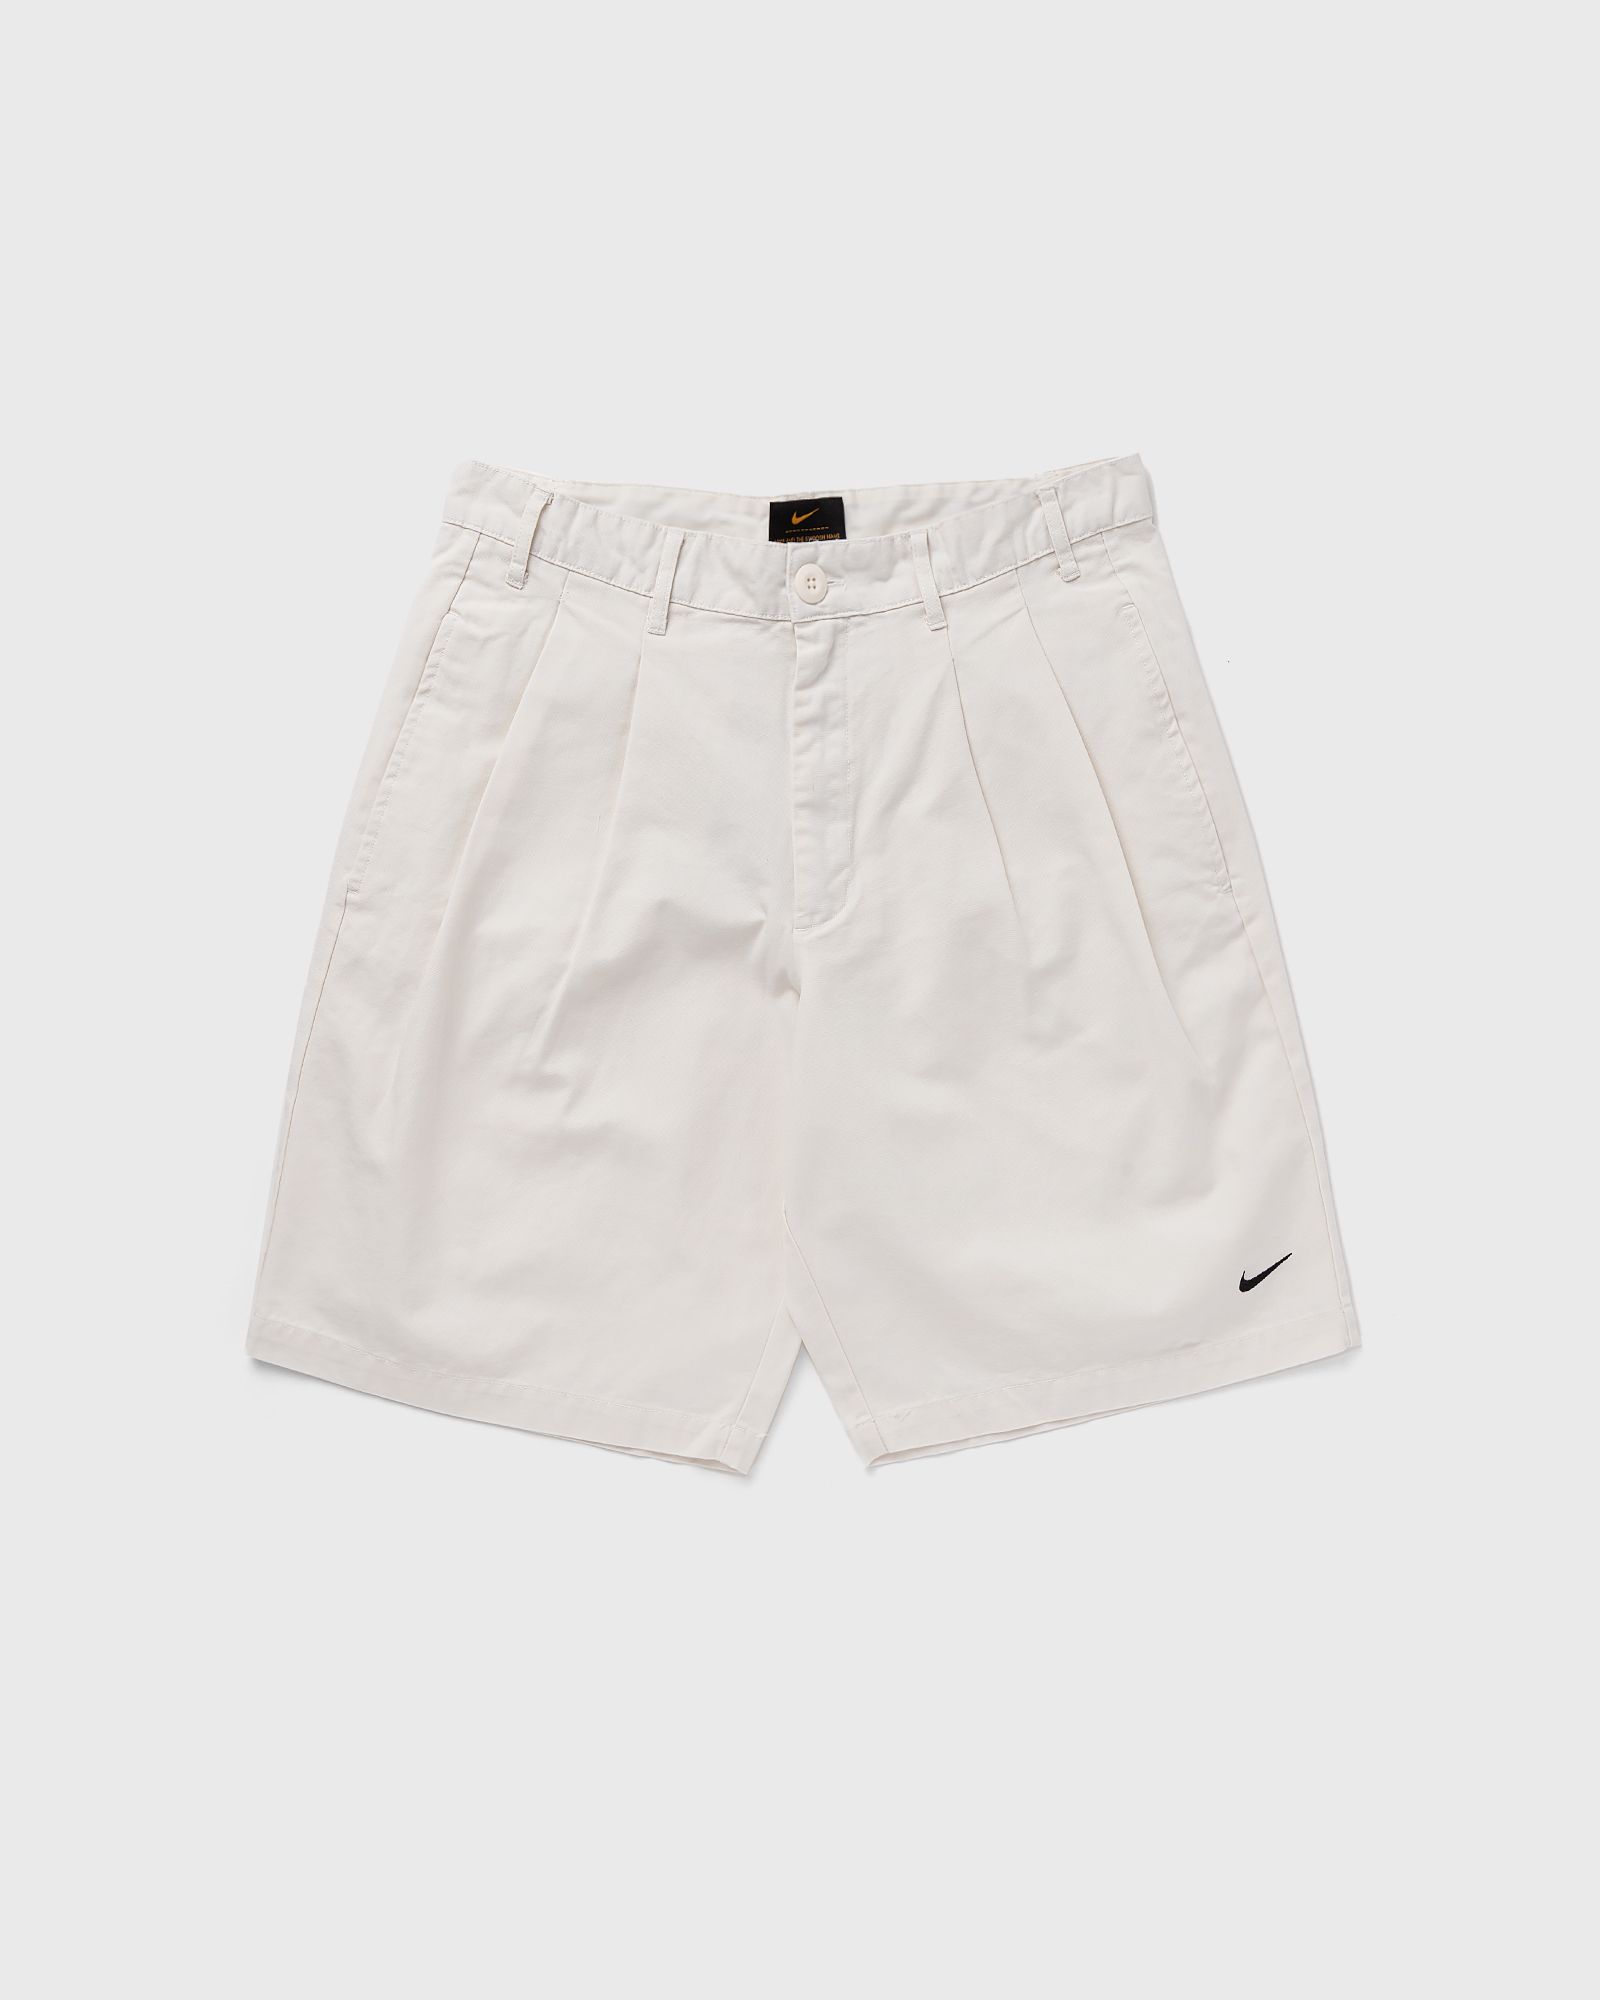 Nike - pleated chino shorts men casual shorts white in größe:xxl